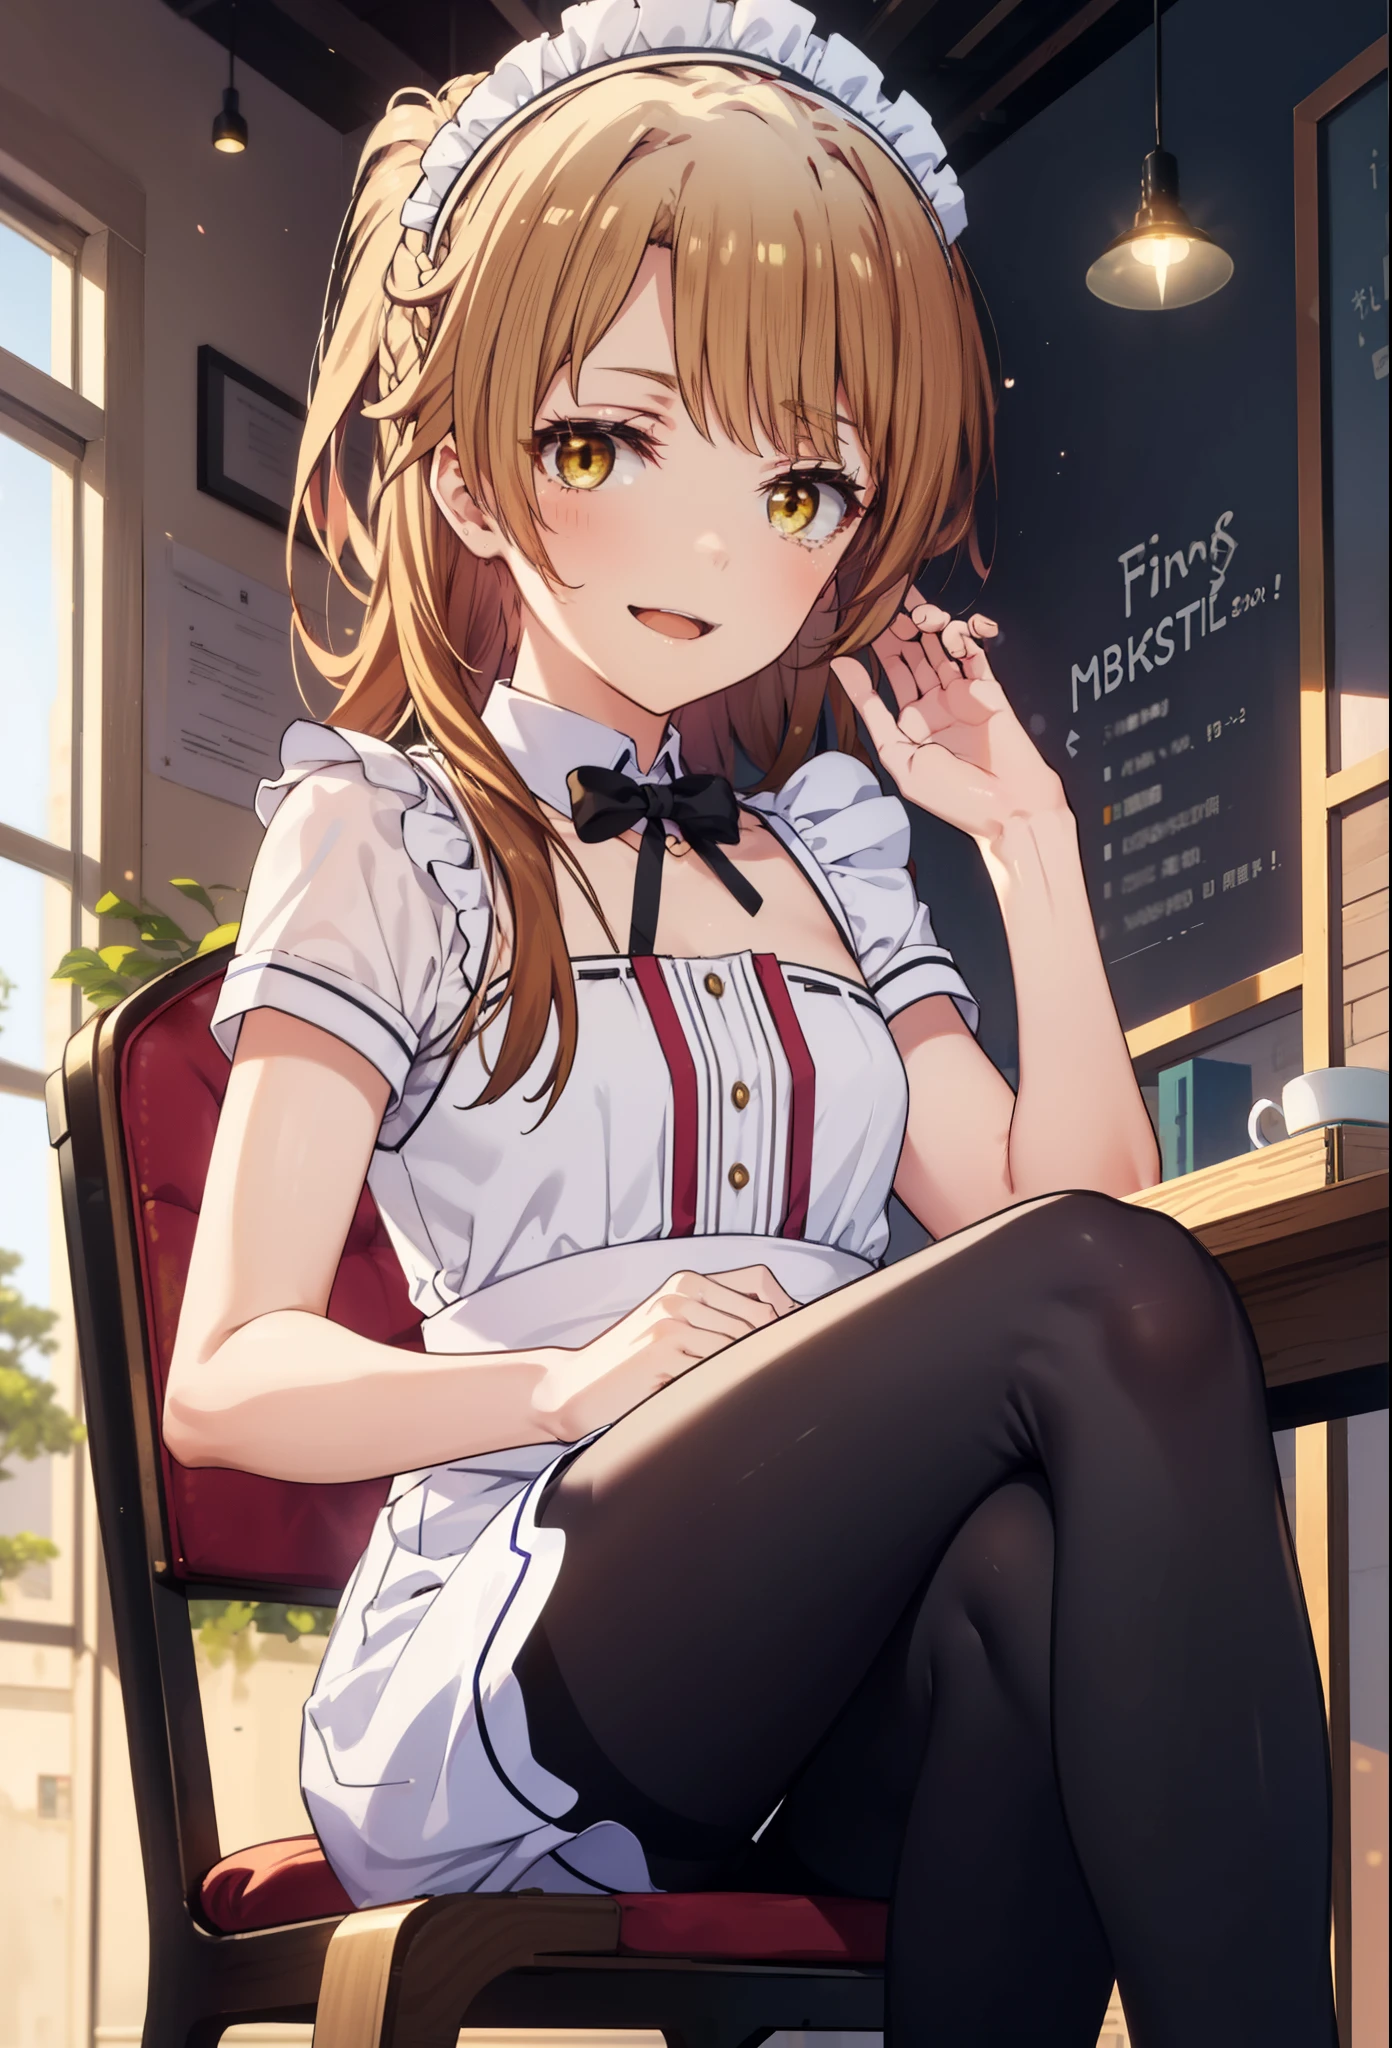 irohaisshiki, iroha isshiki, long hair, brown hair, (brown eyes:1.5), Smile, smile, open your mouth,short braided hair,ponytail,blush,smile,Maid clothes,Medium chest,she was wearing a miniskirt, black pantyhose, sitting cross-legged on a chair,So that the whole body goes into the illustration,
break indoors, coffee shop,
break looking at viewer,
break (masterpiece:1.2), highest quality, High resolution, unity 8k wallpaper, (shape:0.8), (fine and beautiful eyes:1.6), highly detailed face, perfect lighting, Very detailed CG, (perfect hands, perfect anatomy),